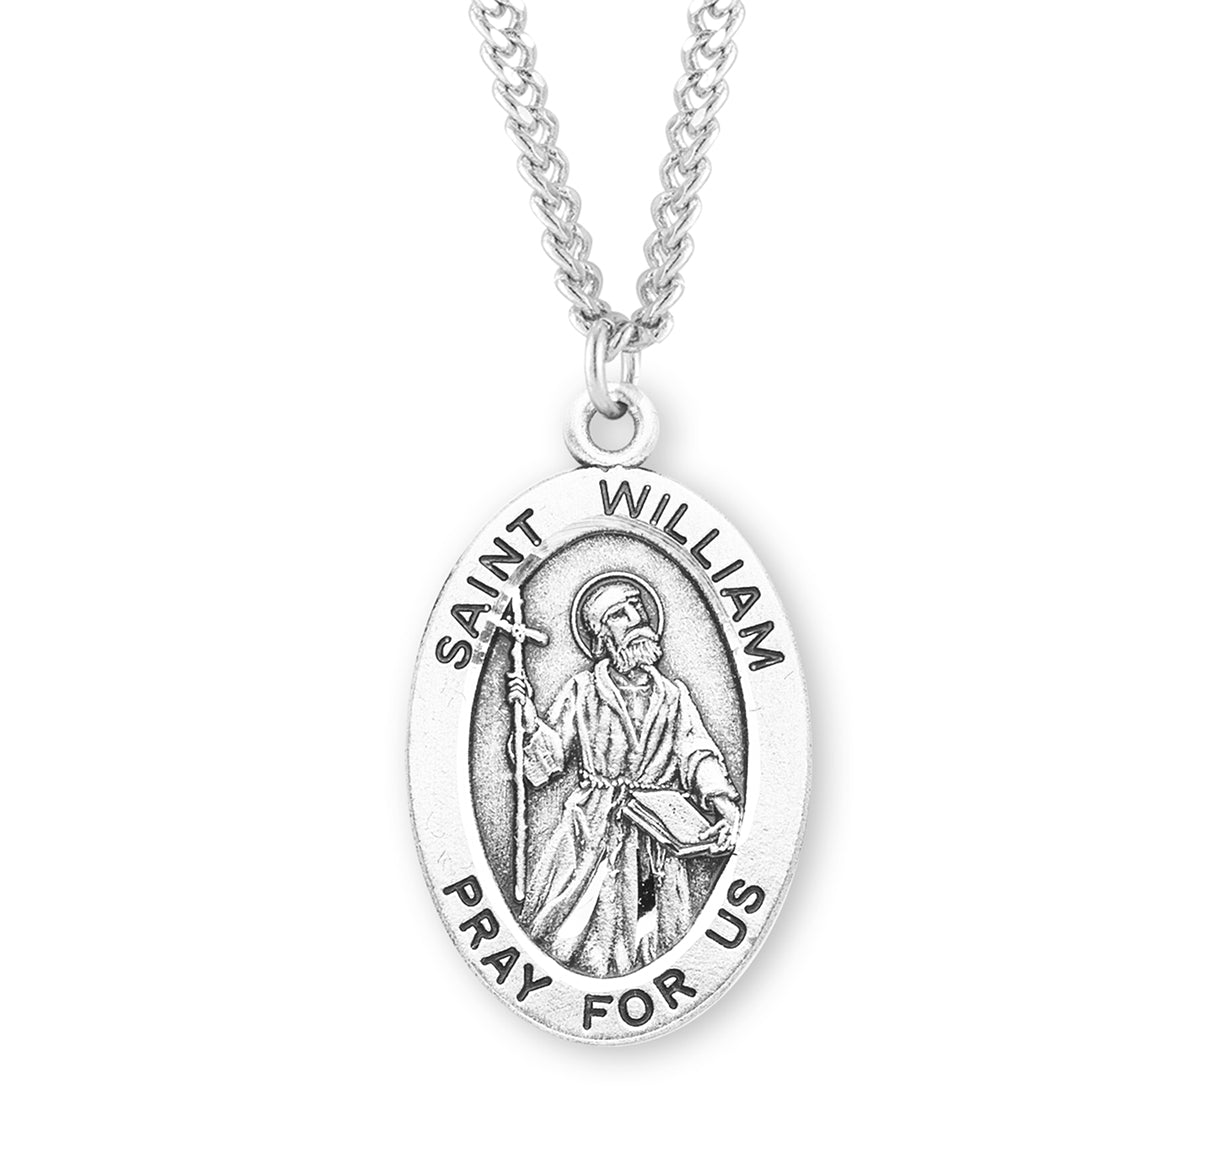 St. William Sterling Silver Medal Necklace